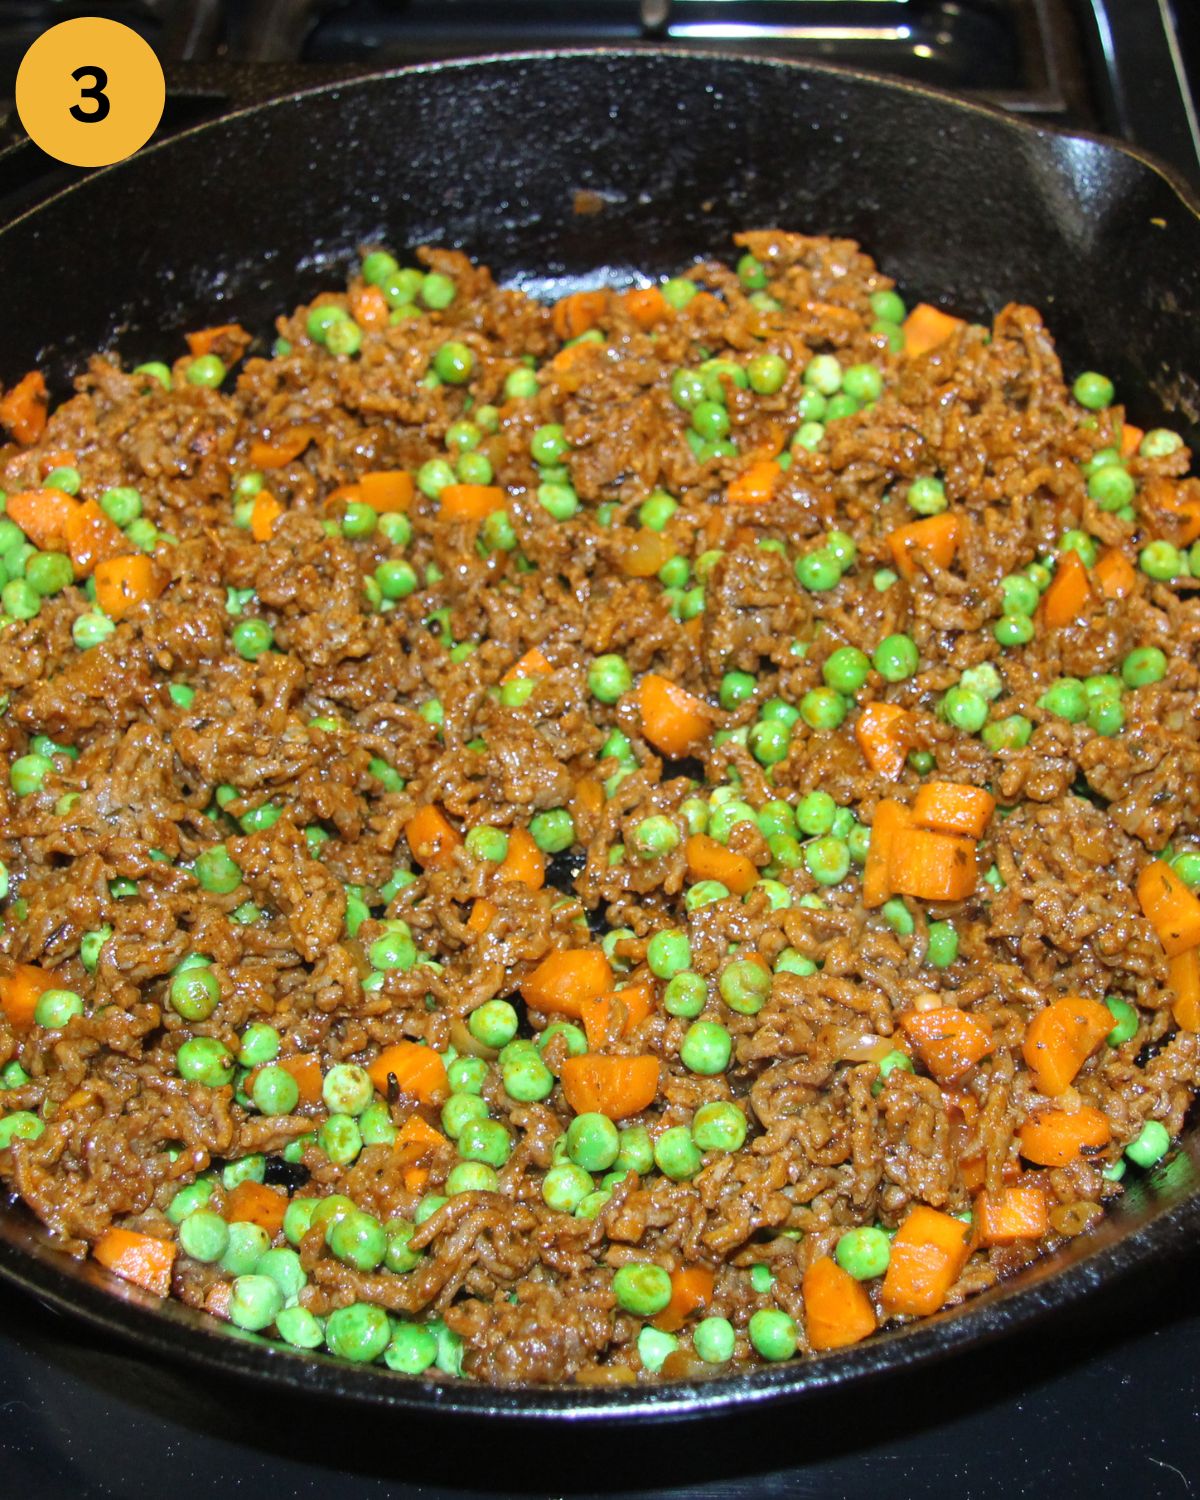 ground meat, carrots and peas cooking in a skillet.